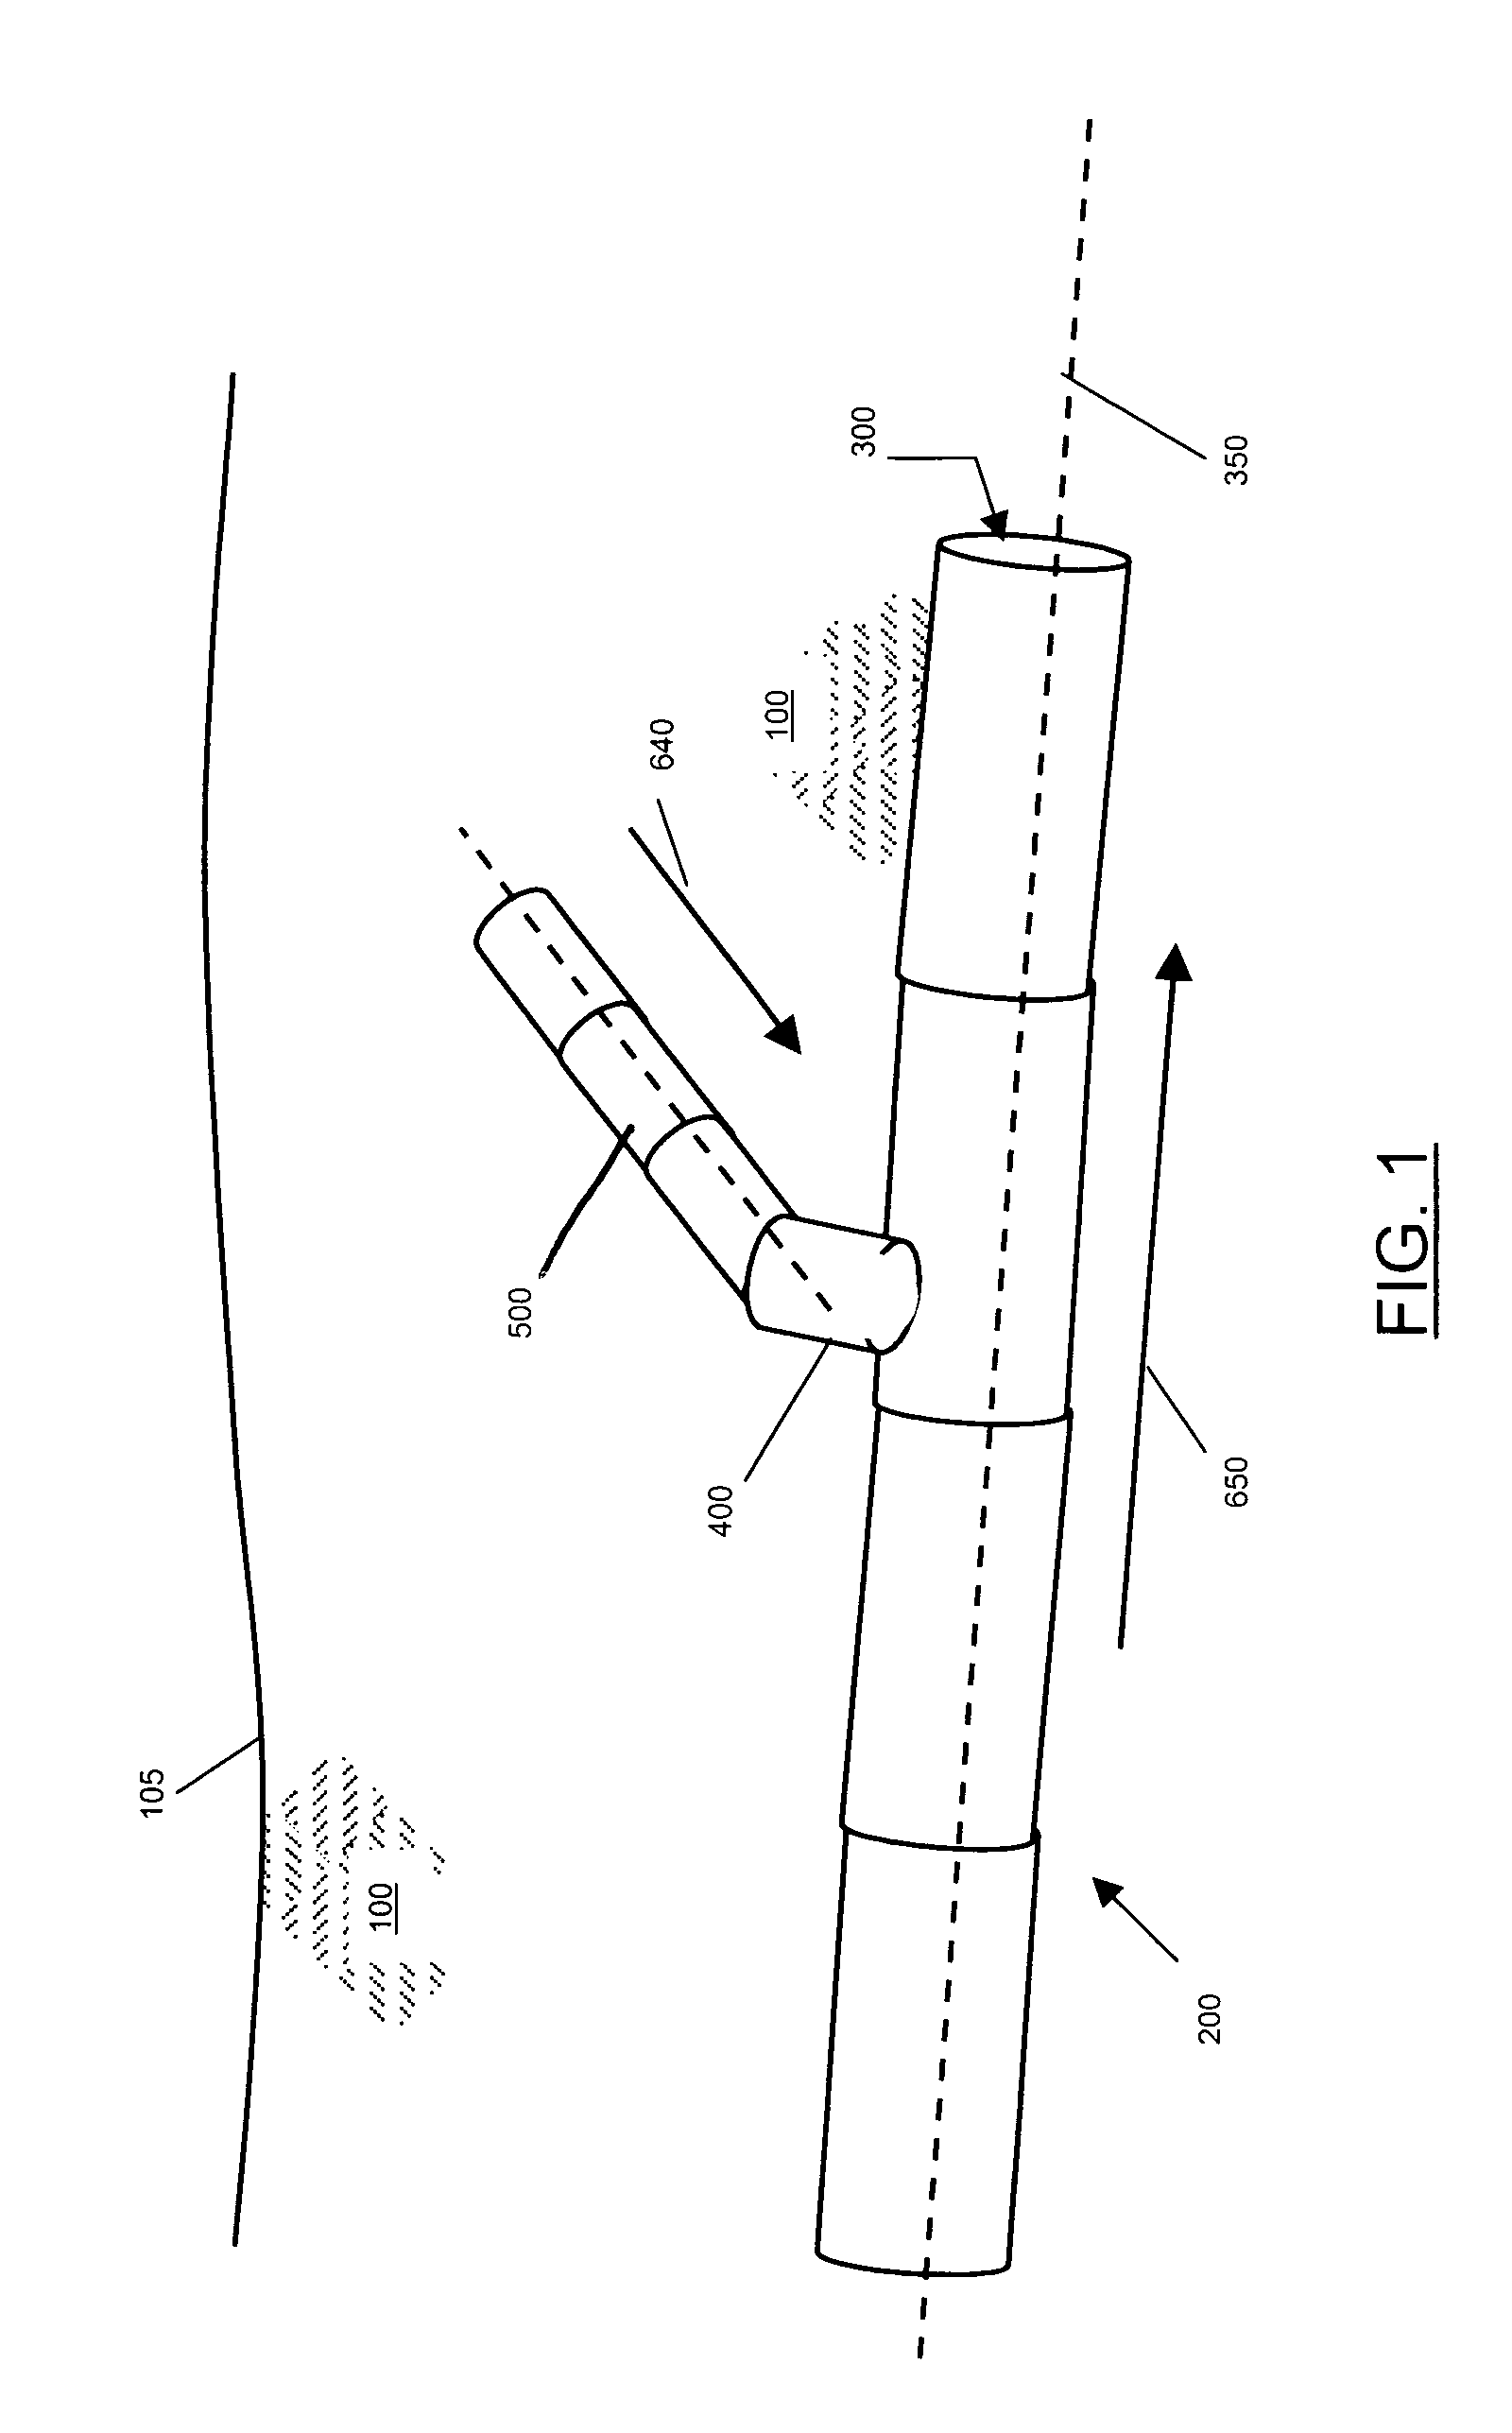 Apparatus and method for the repair and stabilization of underground pipes